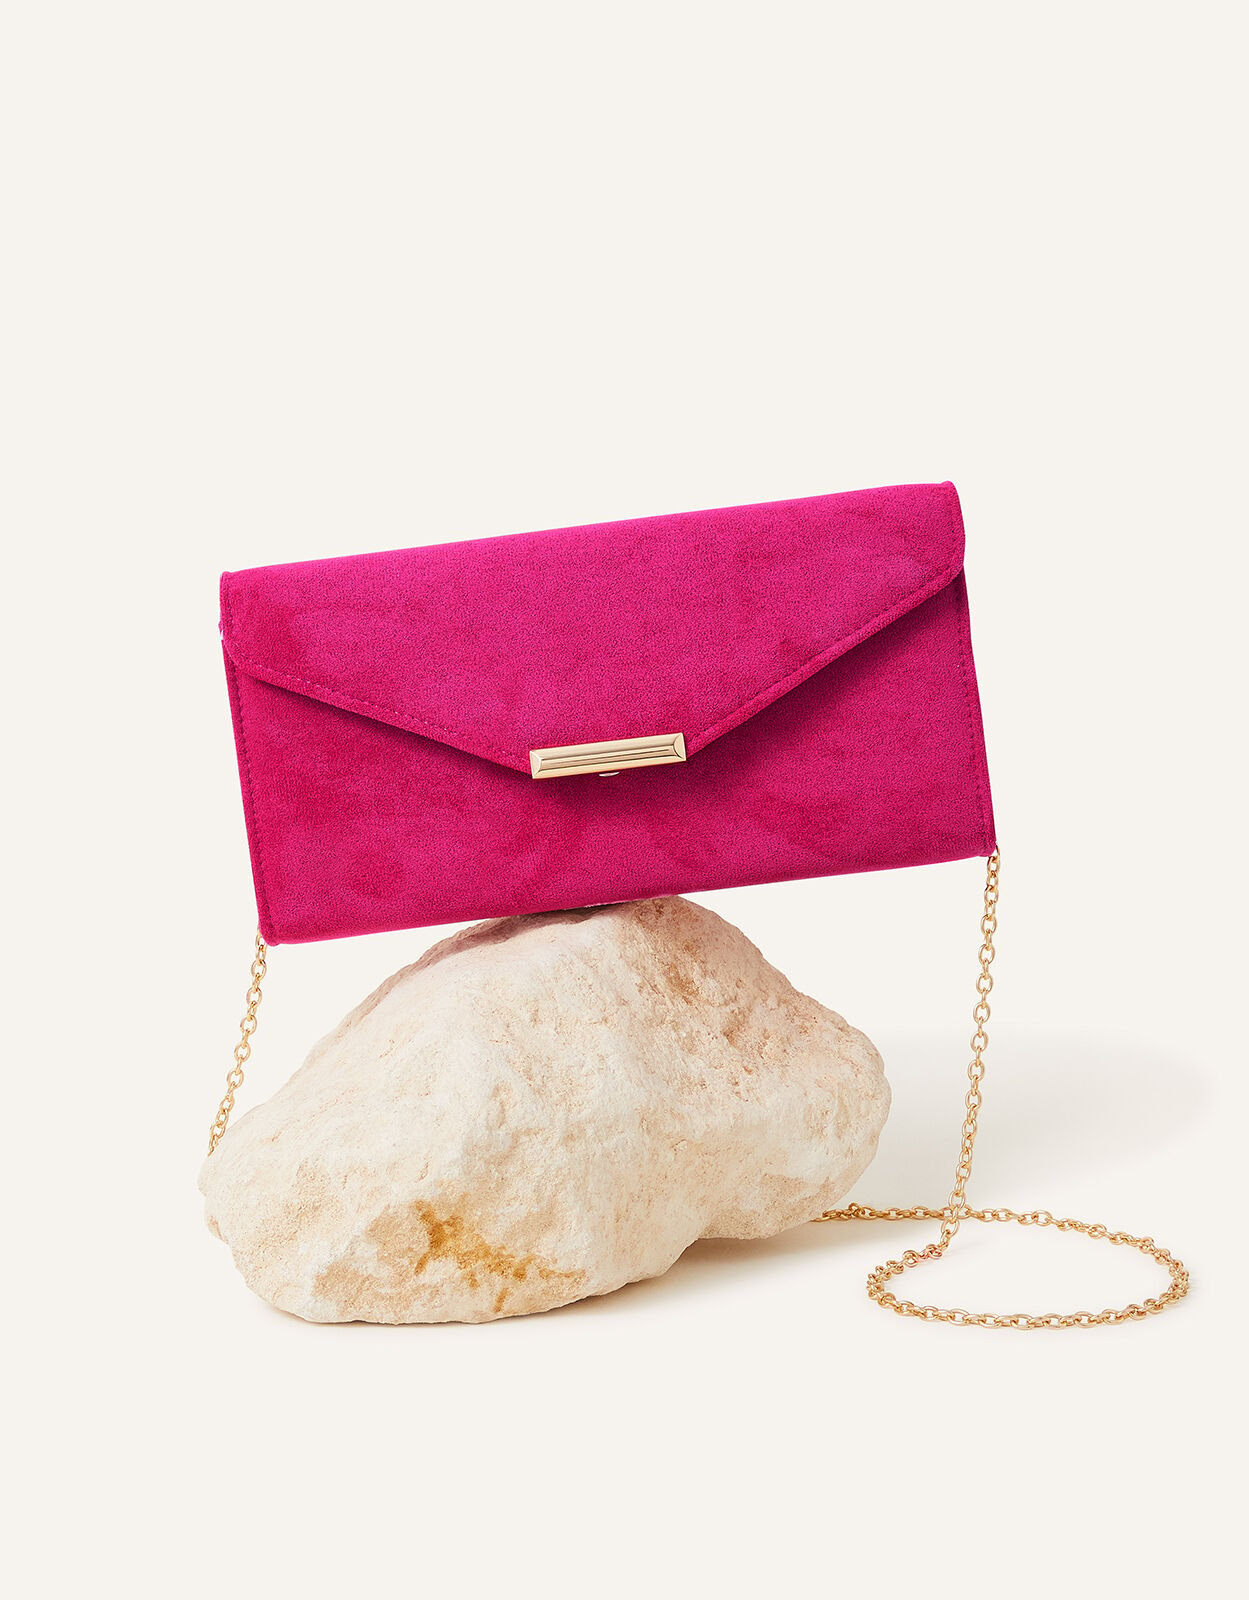 Classic Sinamay Candy Pink Clutch Bag For Weddings